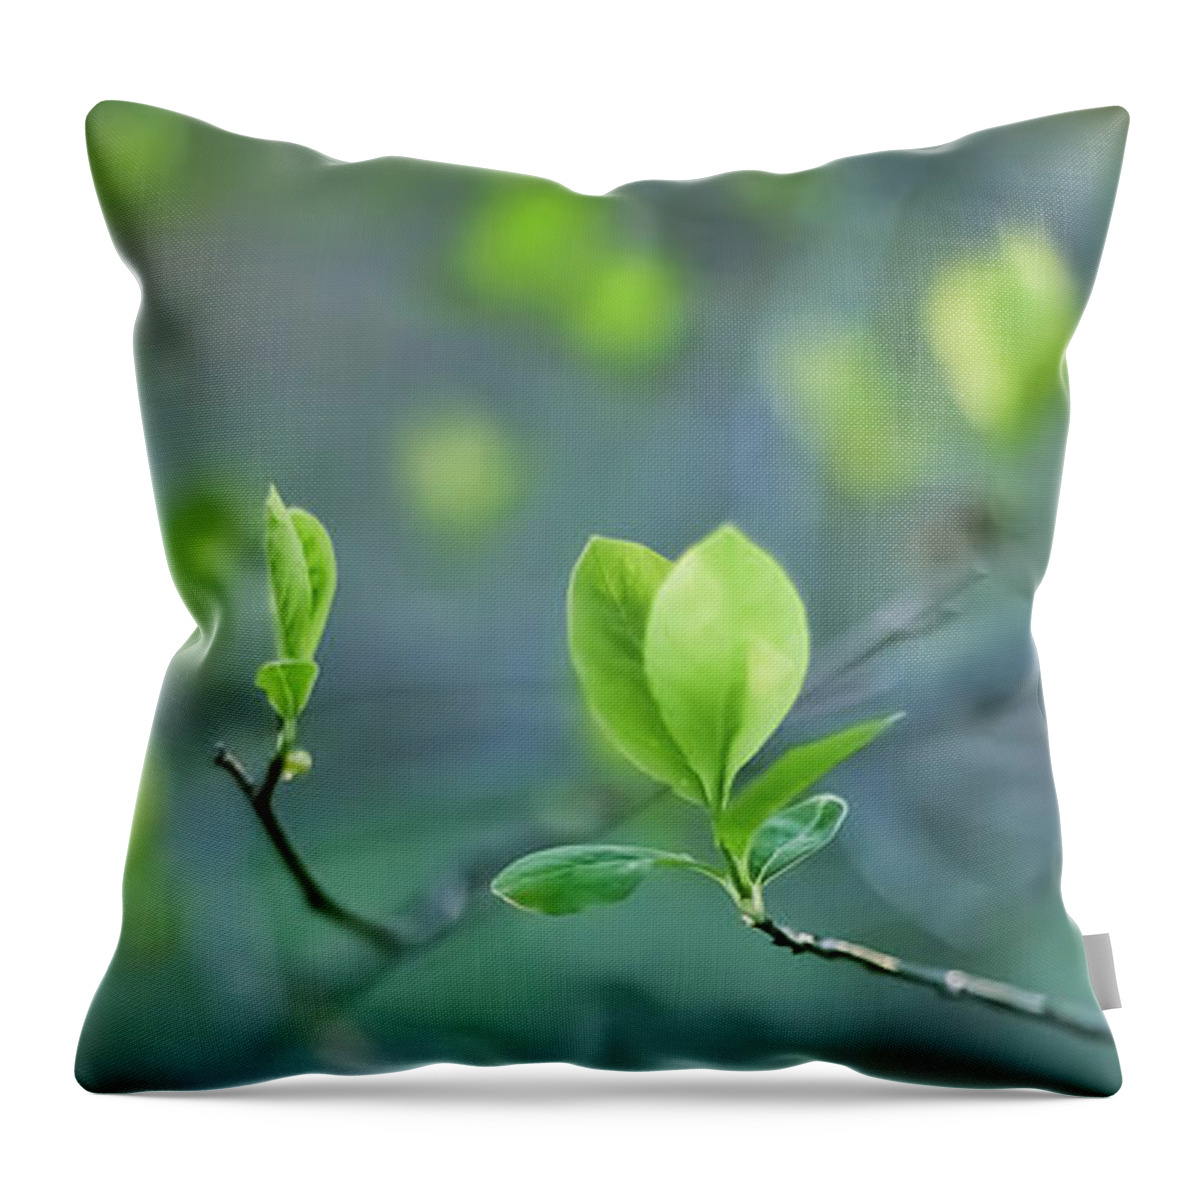 Leaves Throw Pillow featuring the photograph Closer To Spring by Elvira Pinkhas